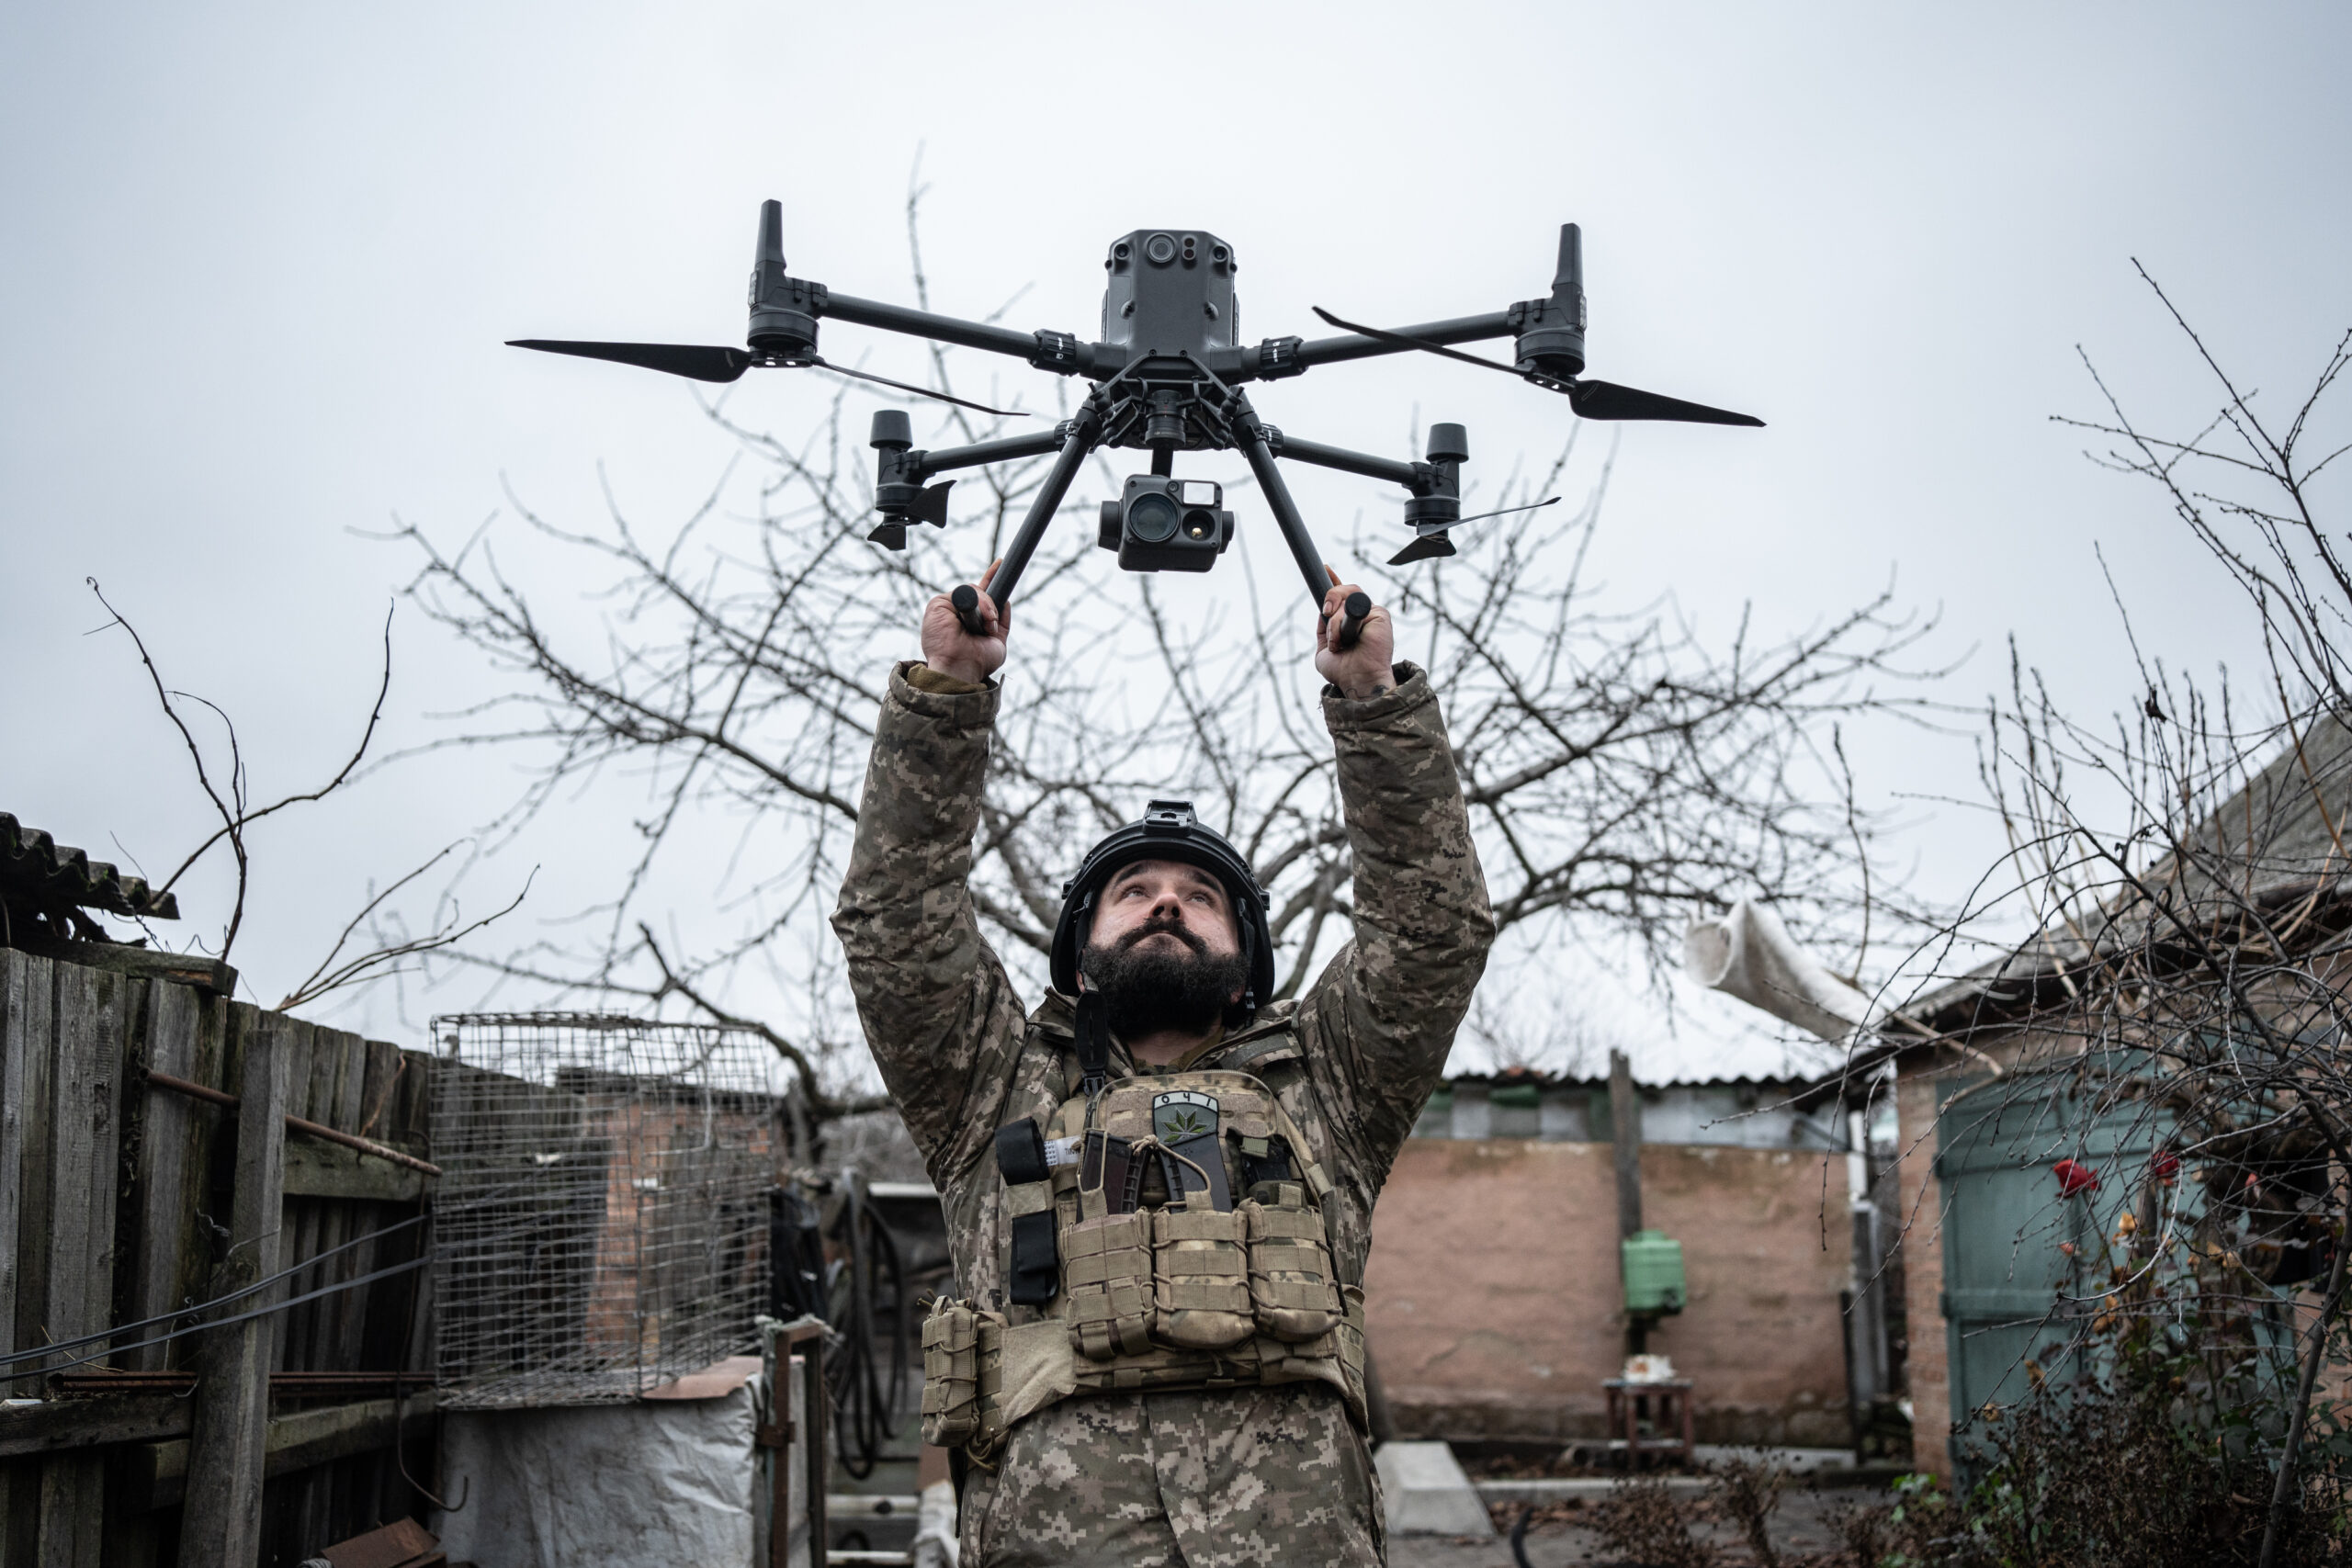 A male soldier holds a drone in the air.